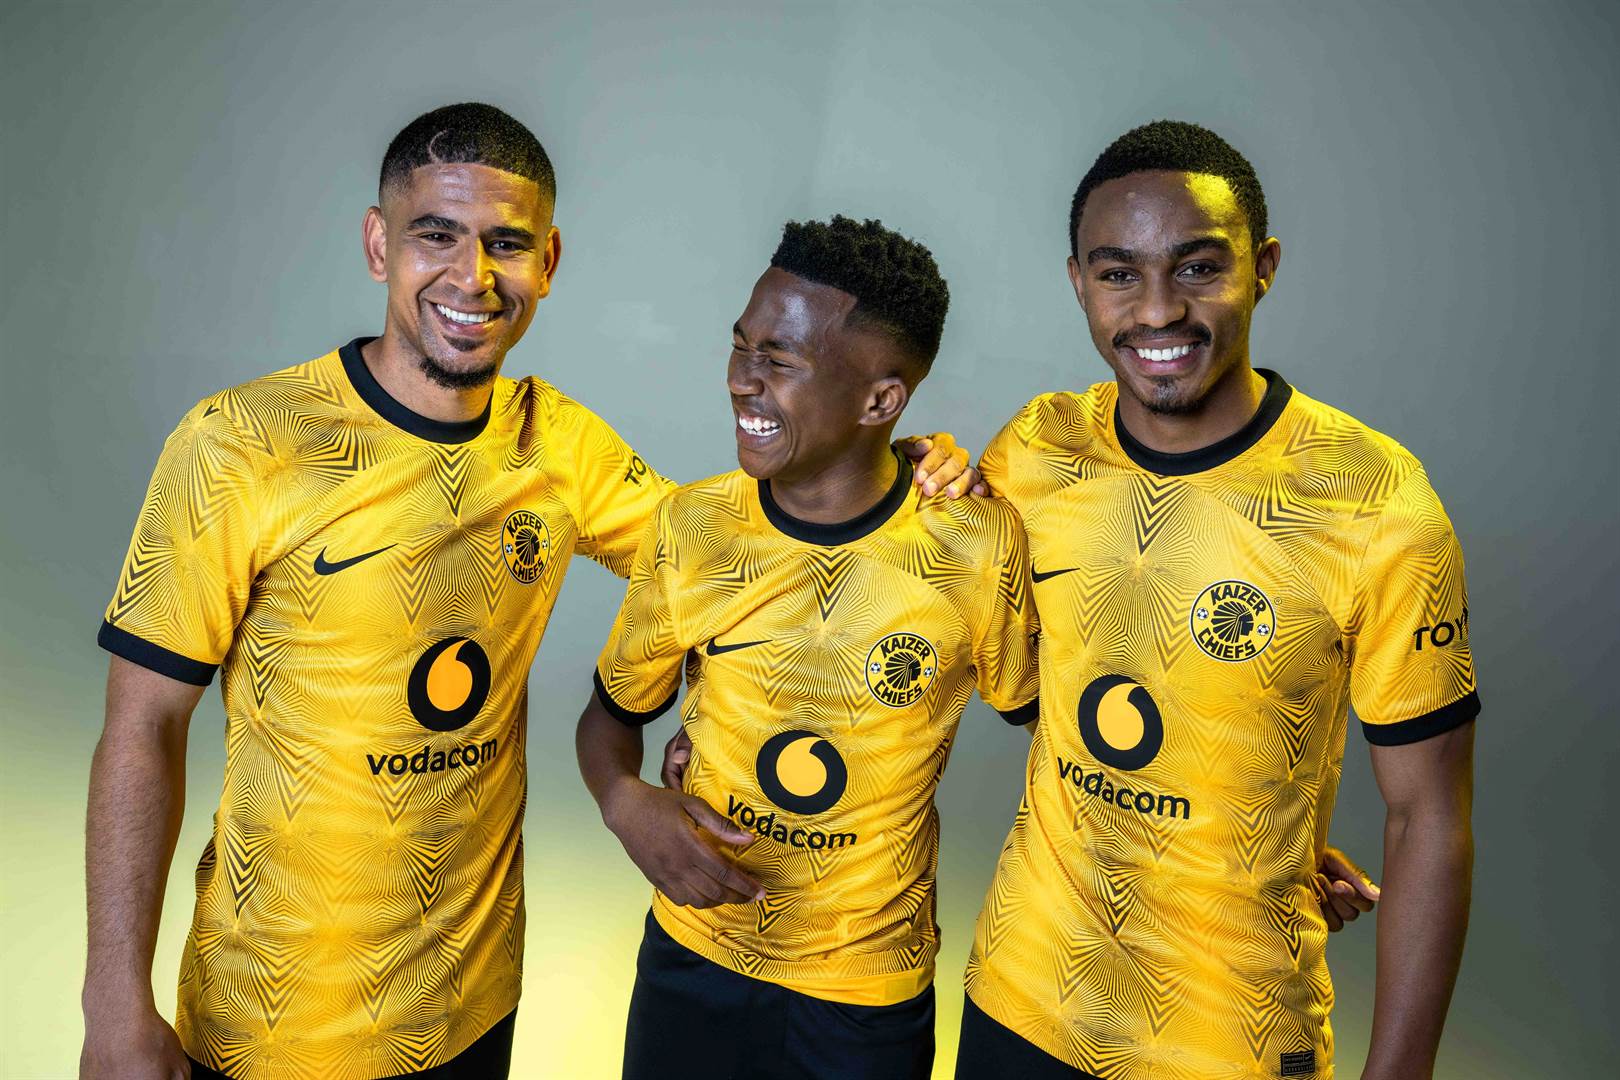 Scroll through the gallery to see Kaizer Chiefs' n